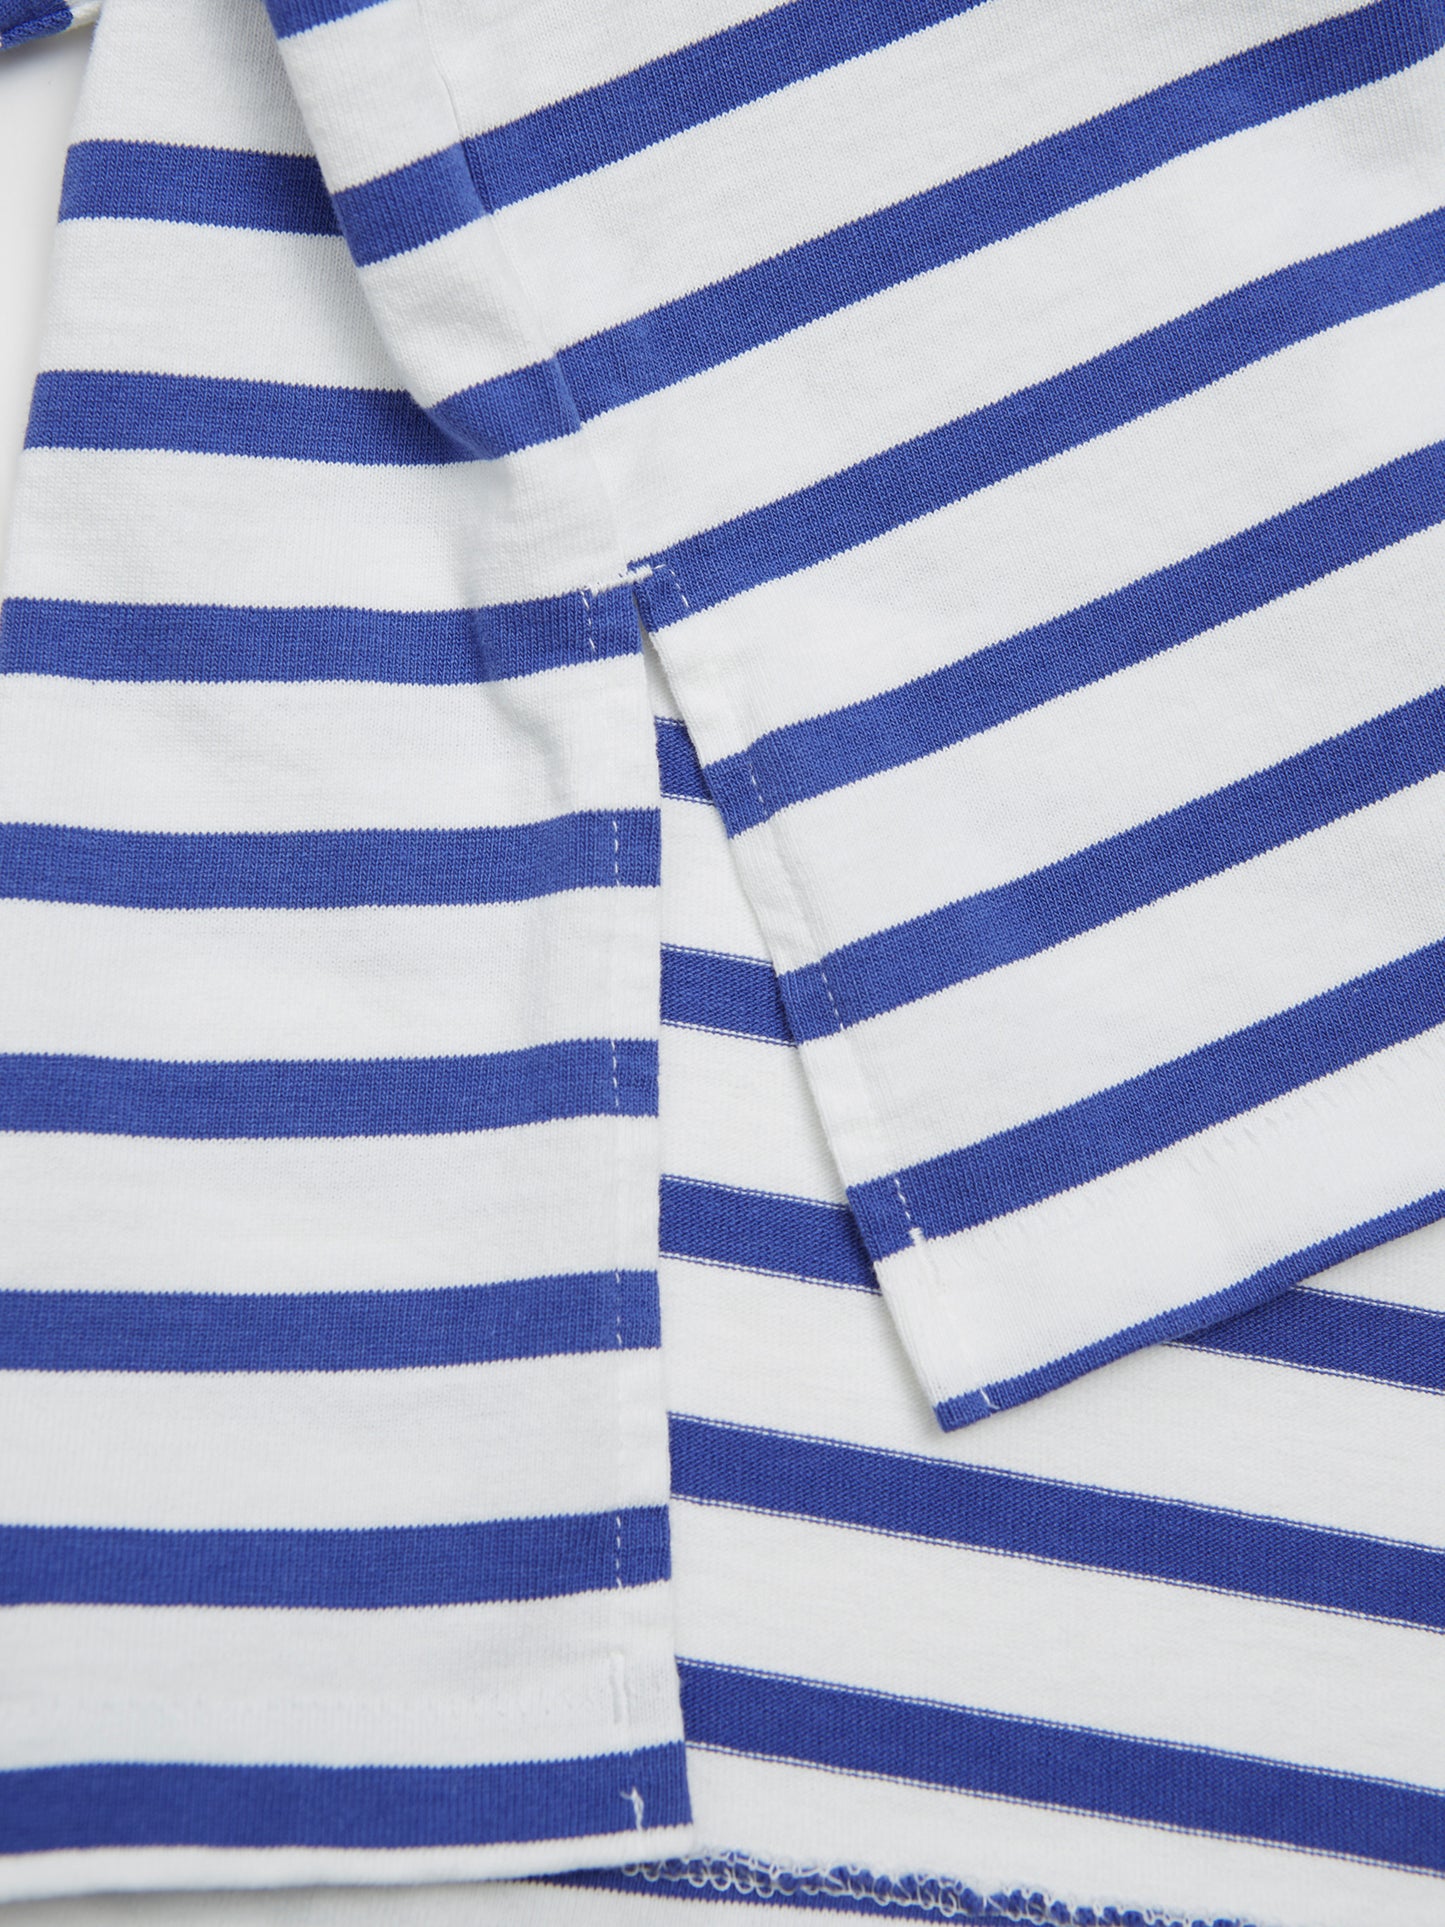 BAGGY BOAT S/S TEE COTTON BORDER JERSEY AM-C0202 White/Blue